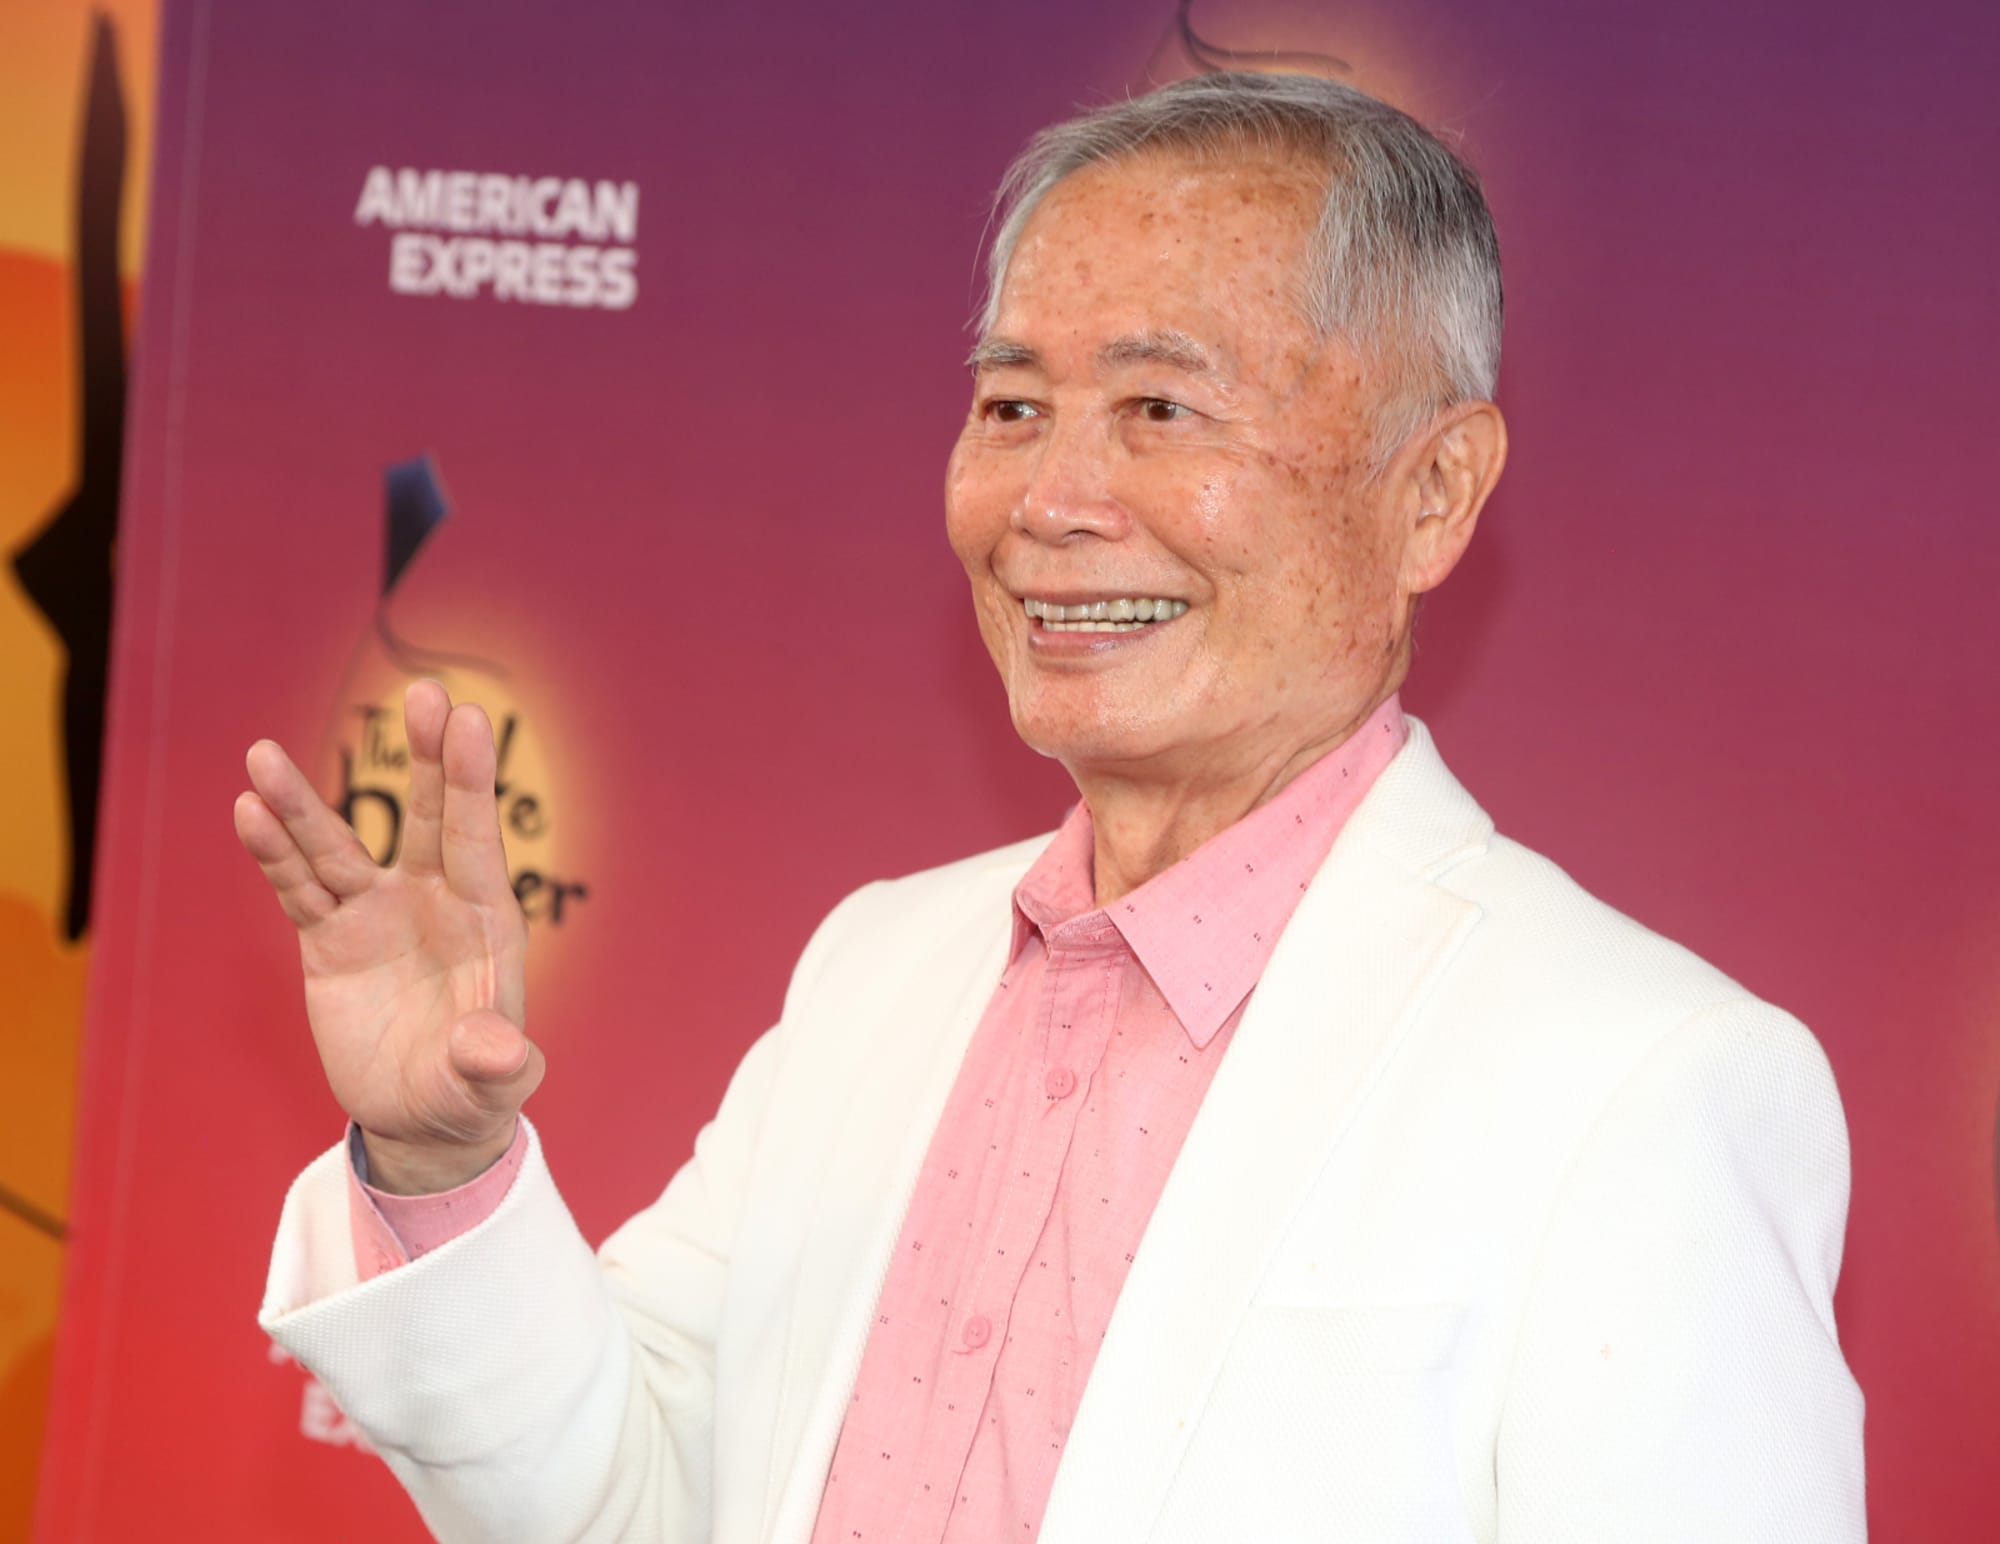 George Takei says he doesn’t talk about Bill Shatner for publicity